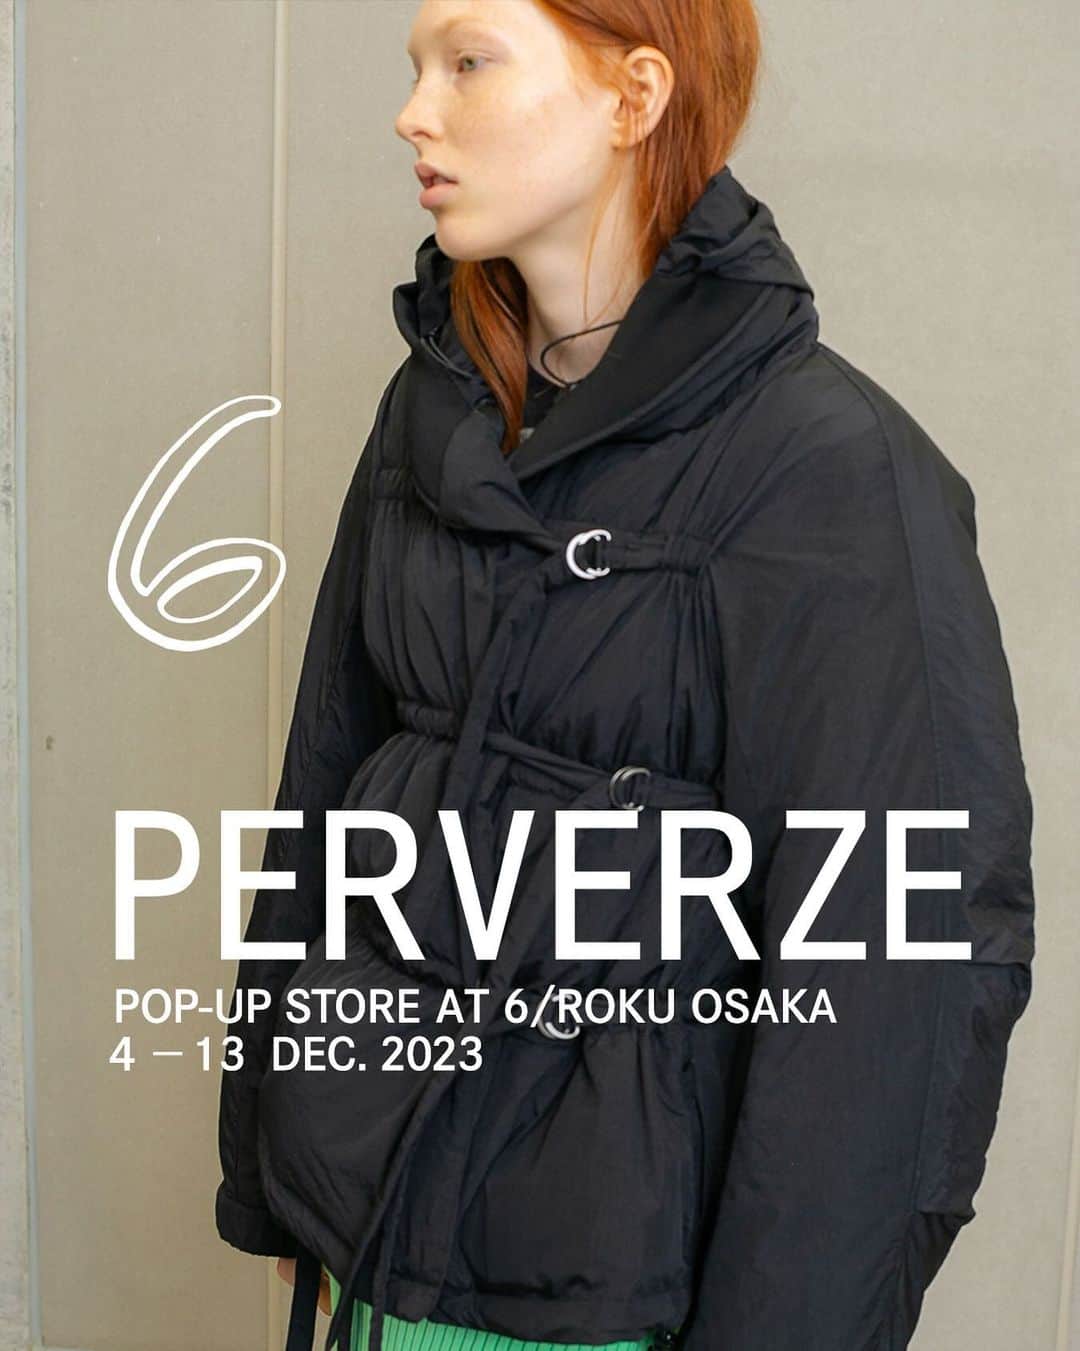 PERVERZE_OFFICIALのインスタグラム：「We are having a pop-up store from 4th December to 13th December at 6 OSAKA @6______roku . You can see and try our AW23 collection. We're looking forward to seeing you.  12/4(月)から12/13(水)までの期間限定で、6 大阪店にてポップアップストアを開催いたします。 AW23の最新秋冬コレクションアイテムをお試しいただけます。 是非ご覧ください。  【STORE INFORMATION】 6 OSAKA ADRESS: 〒530-8217 大阪府大阪市北区梅田3-1-3 ルクア 2F TEL: 06-6341-7701 TIME: 10:30～20:30  #PERVERZE #AW23」